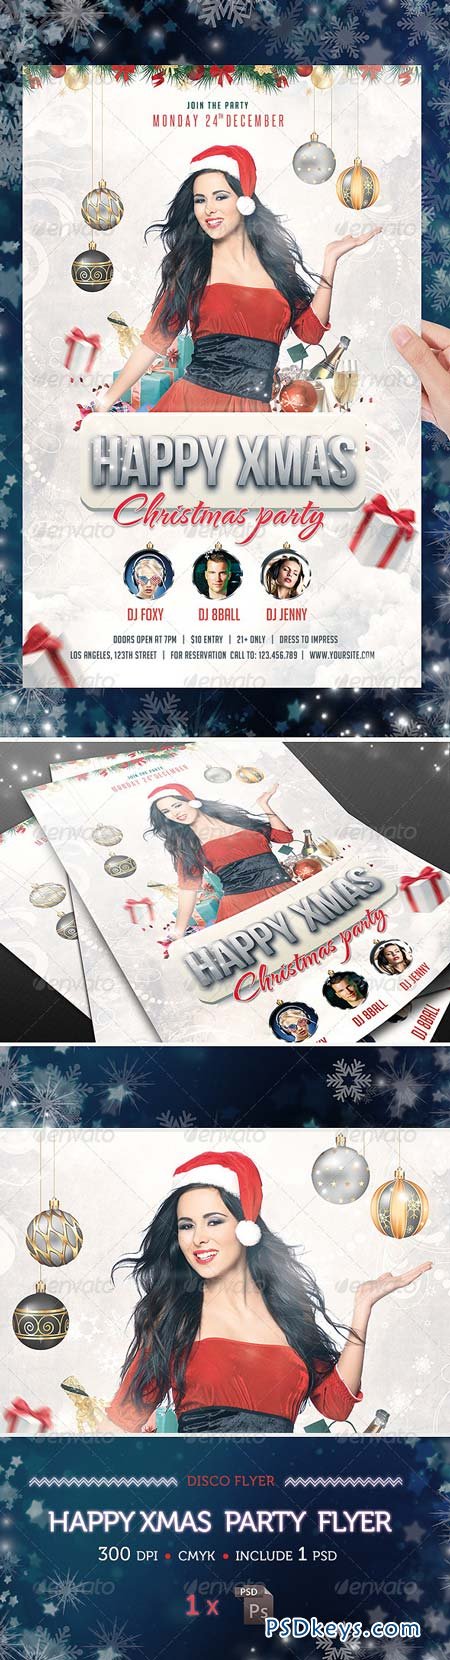 Christmas Party Flyer Template 3368223